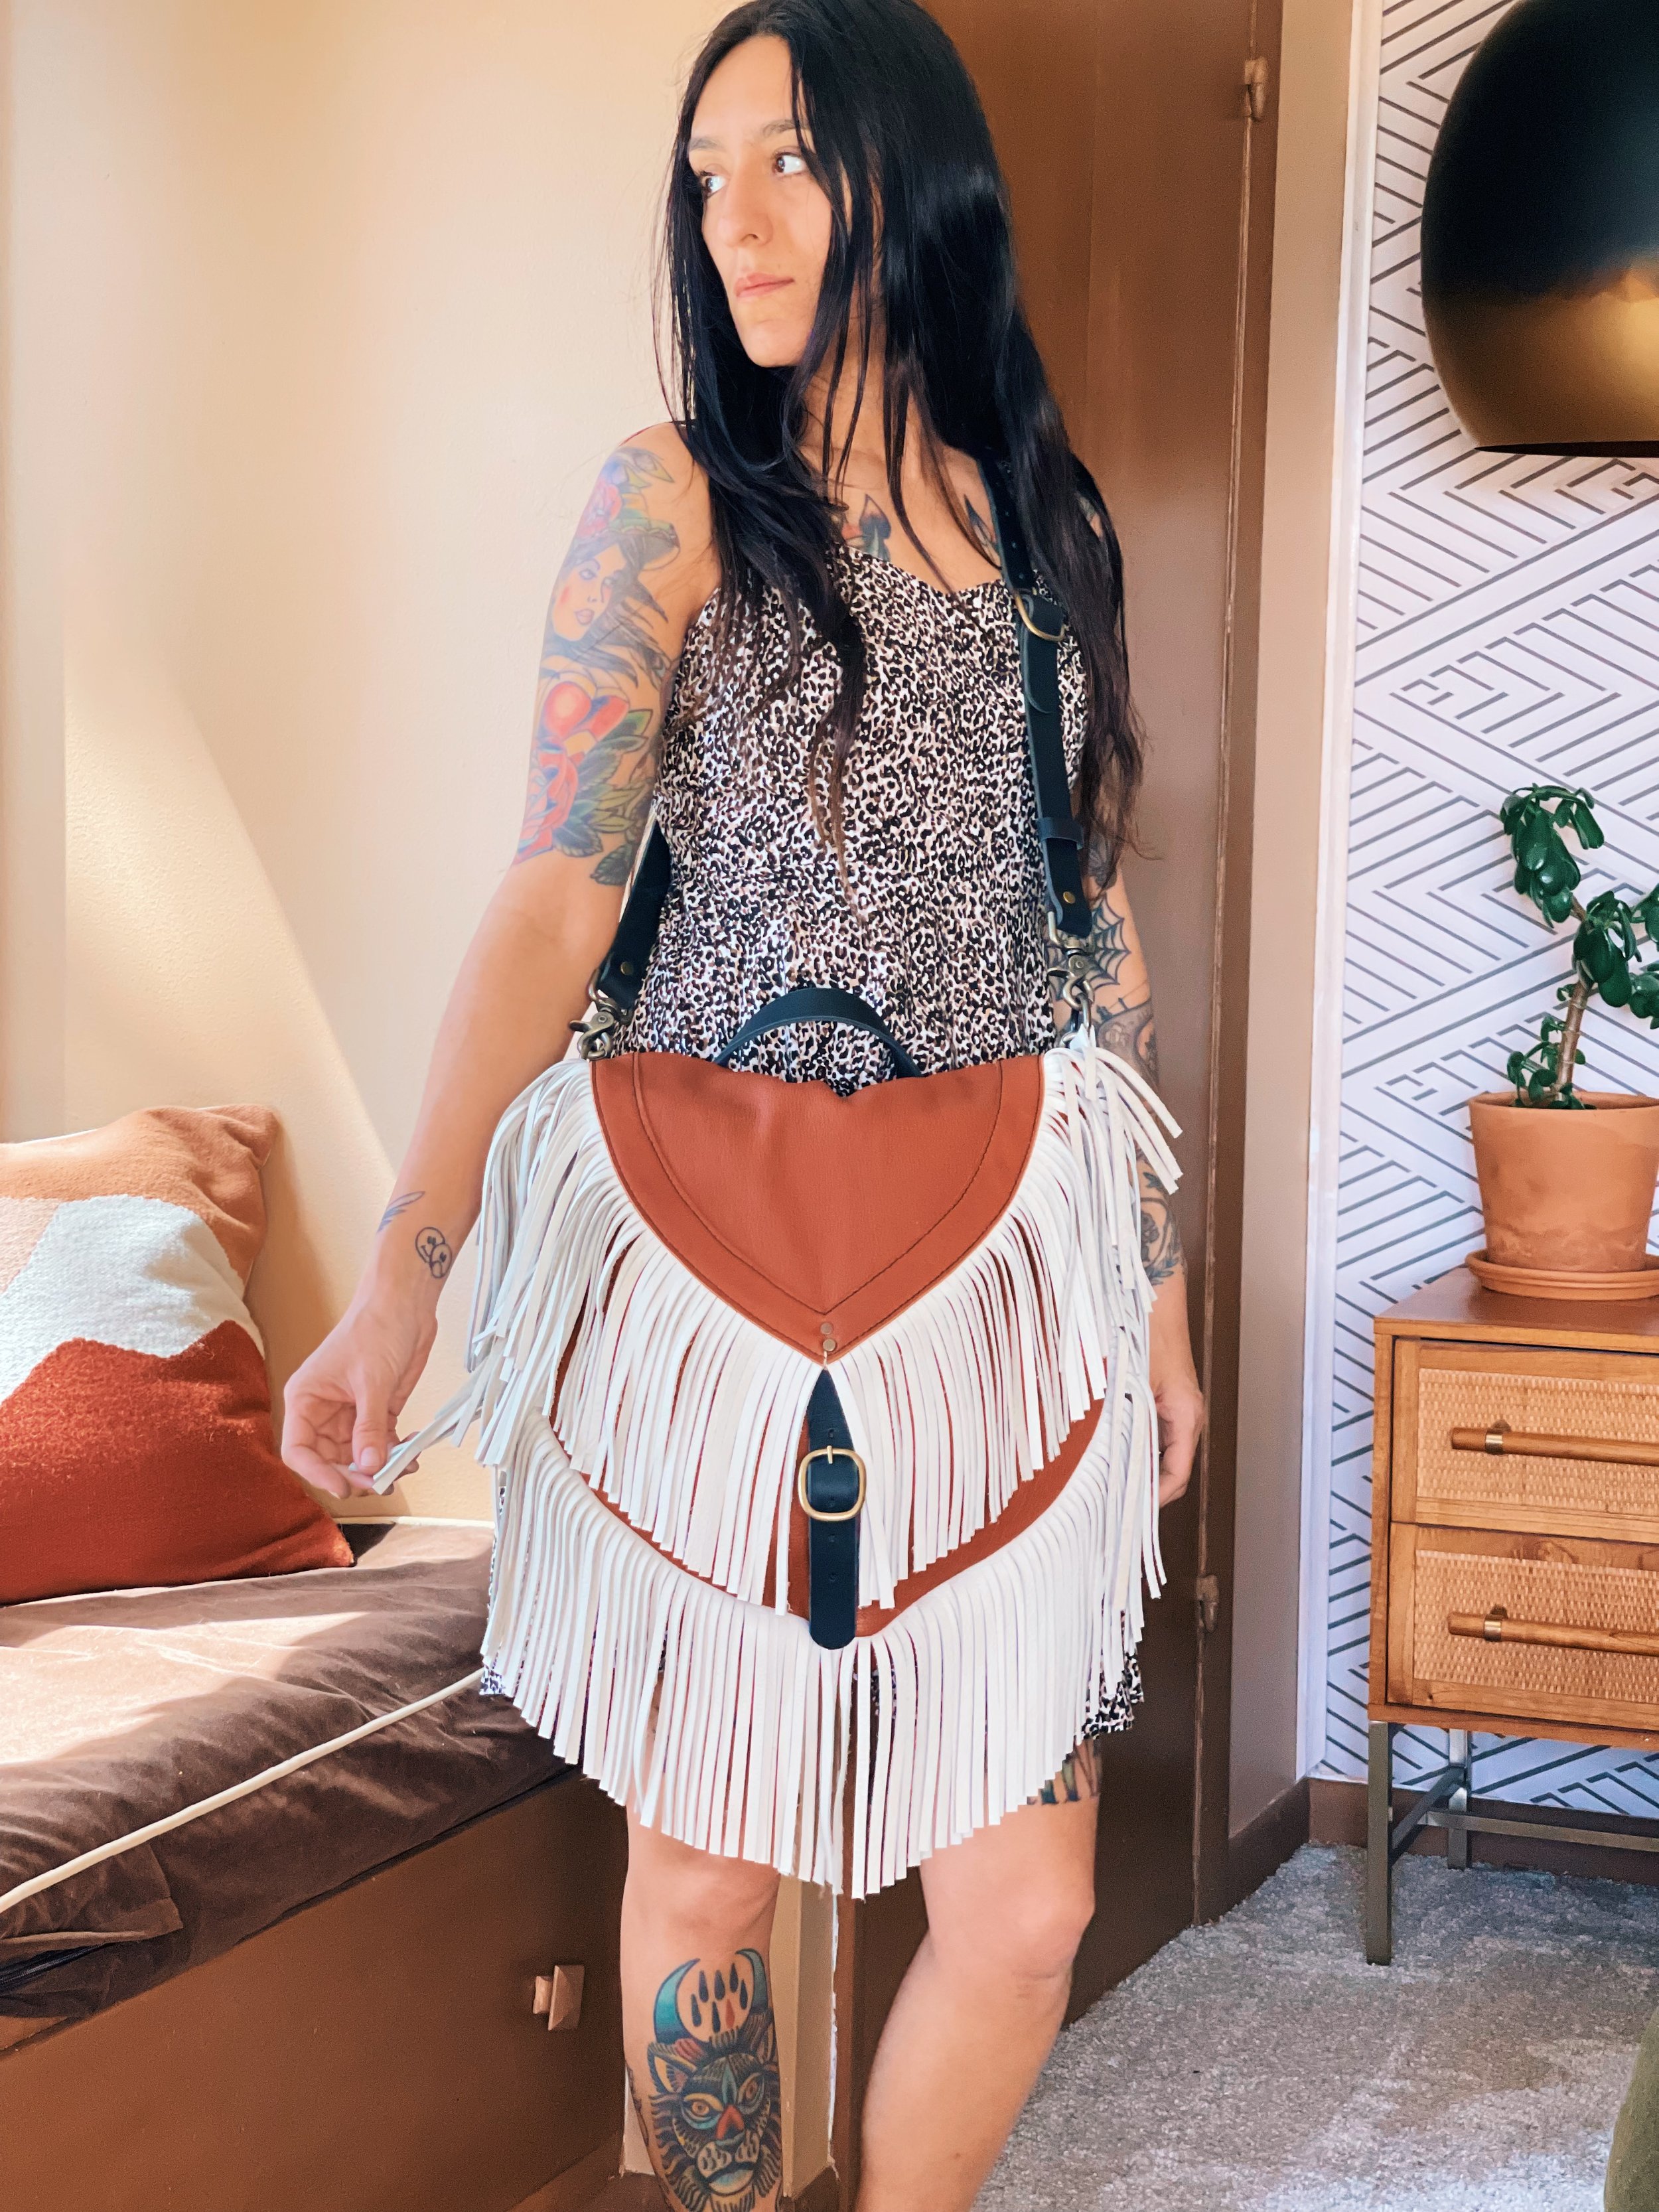  BODY: tobacco bison  FRINGE: custom requested bone leather - may we recommend our white cowhide option for a similar look.  CUSTOM REQUESTS: center rear top D Ring for another backpack convertible option  